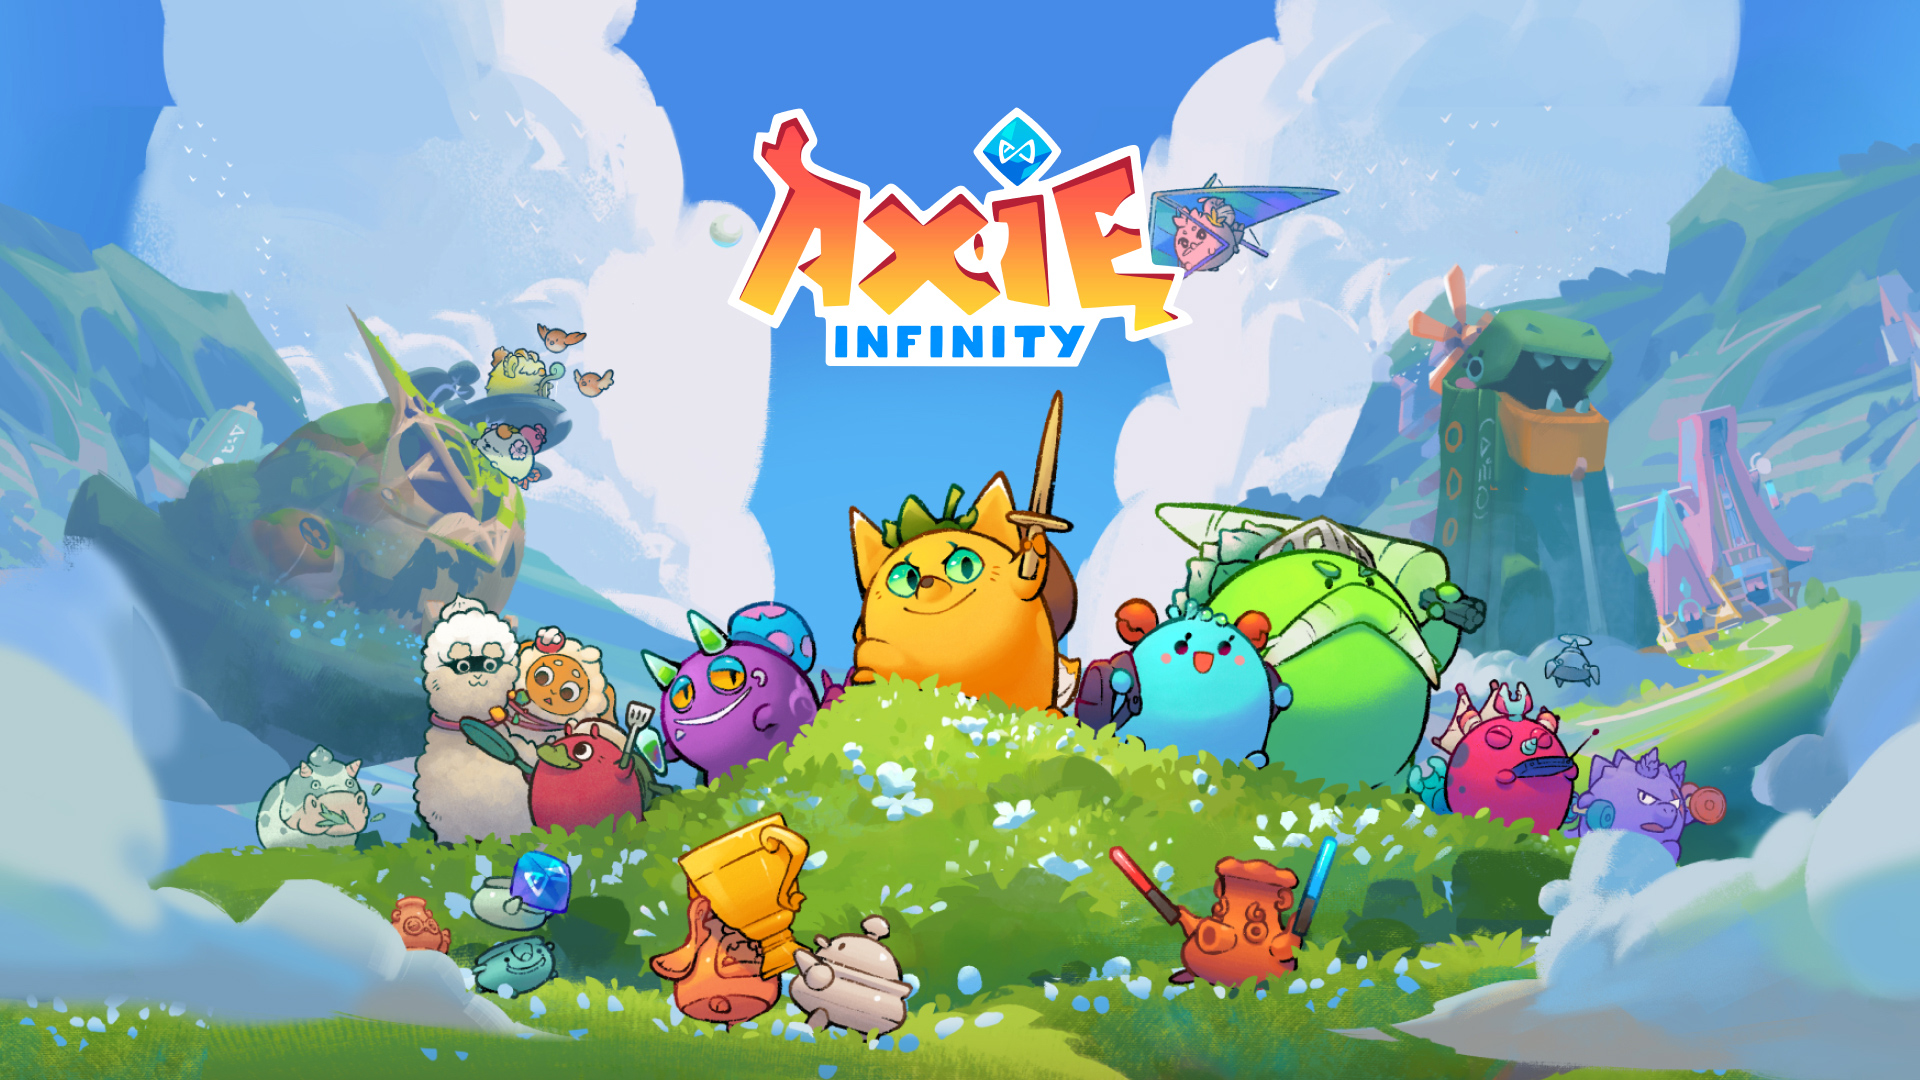 Axie Infinity - Battle, Collect, and Trade Collectible NFT Creatures